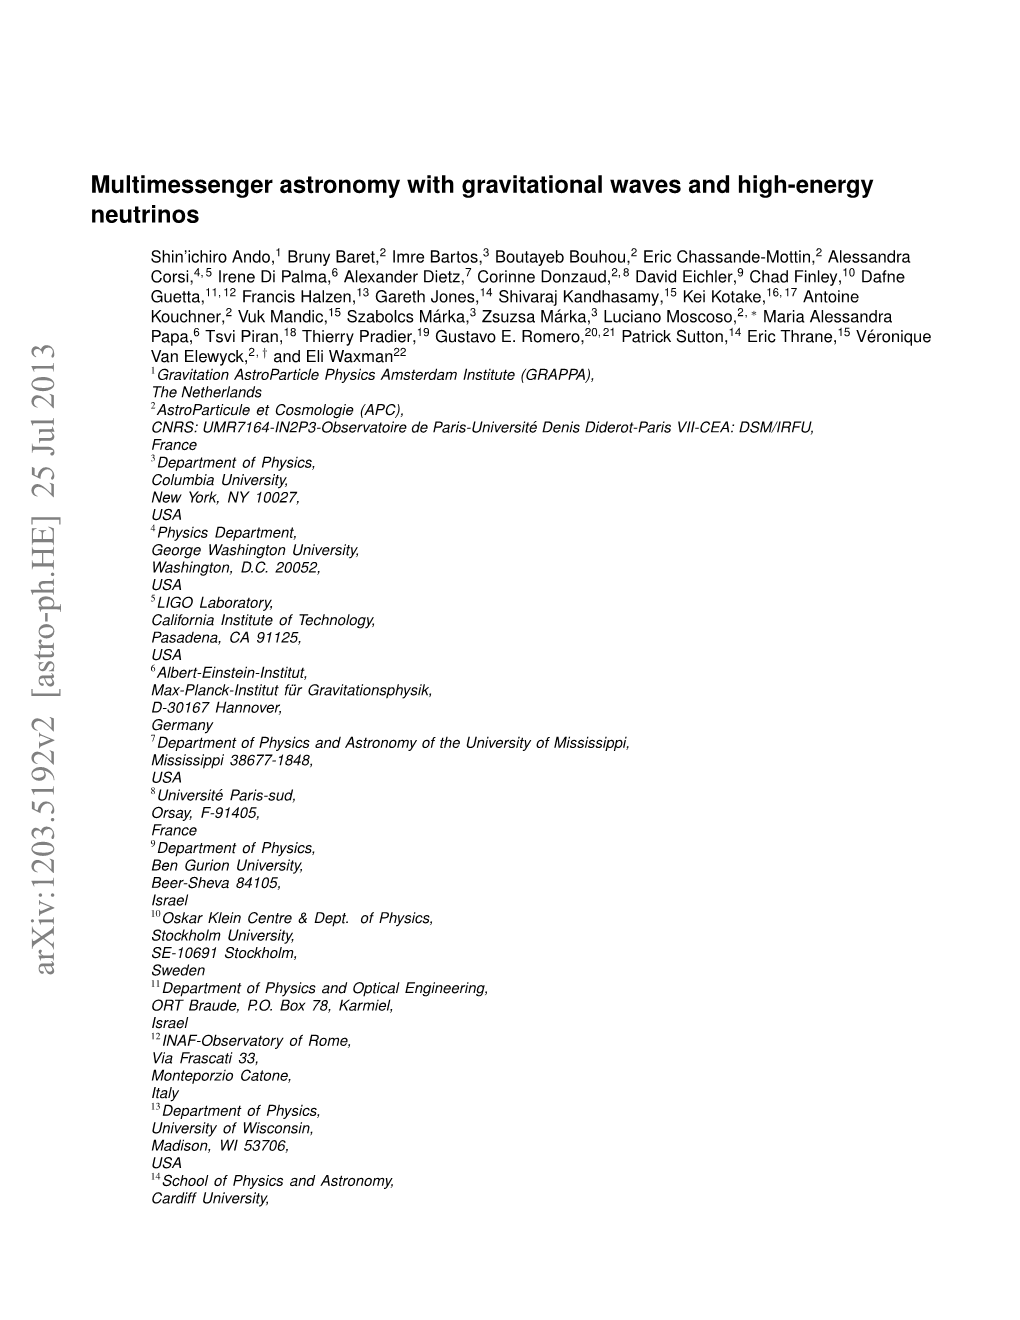 Multimessenger Astronomy with Gravitational Waves and High-Energy Neutrinos